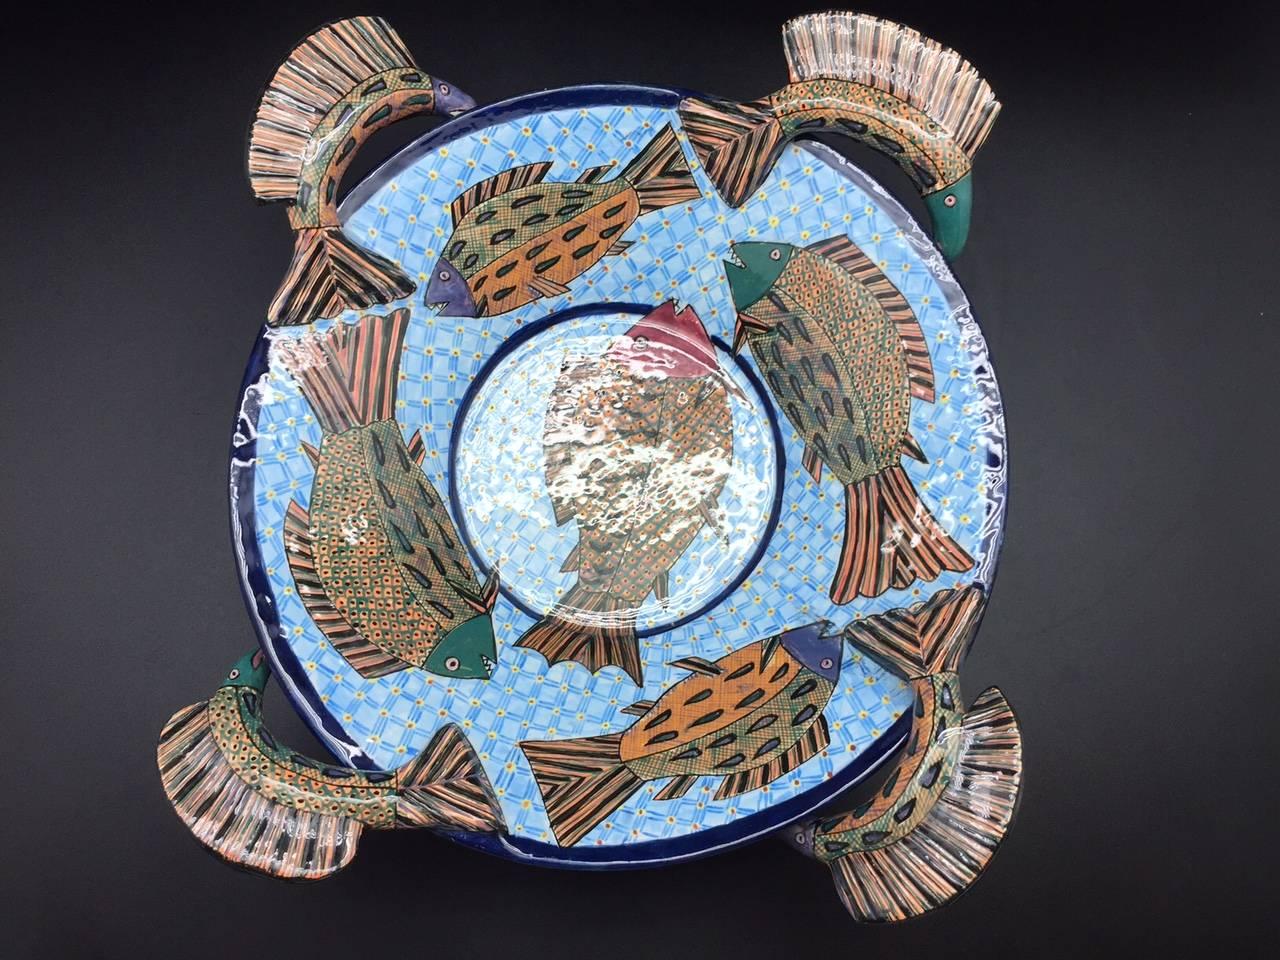 Fish serving bowl, ceramic sculpture by Ardmore from South Africa. Sculpted and painted by Zeblon Msele 17" diameter x 6" H.

Ardmore ceramic art was established by Fée Halsted and is situated in the foothills of the Drakensberg